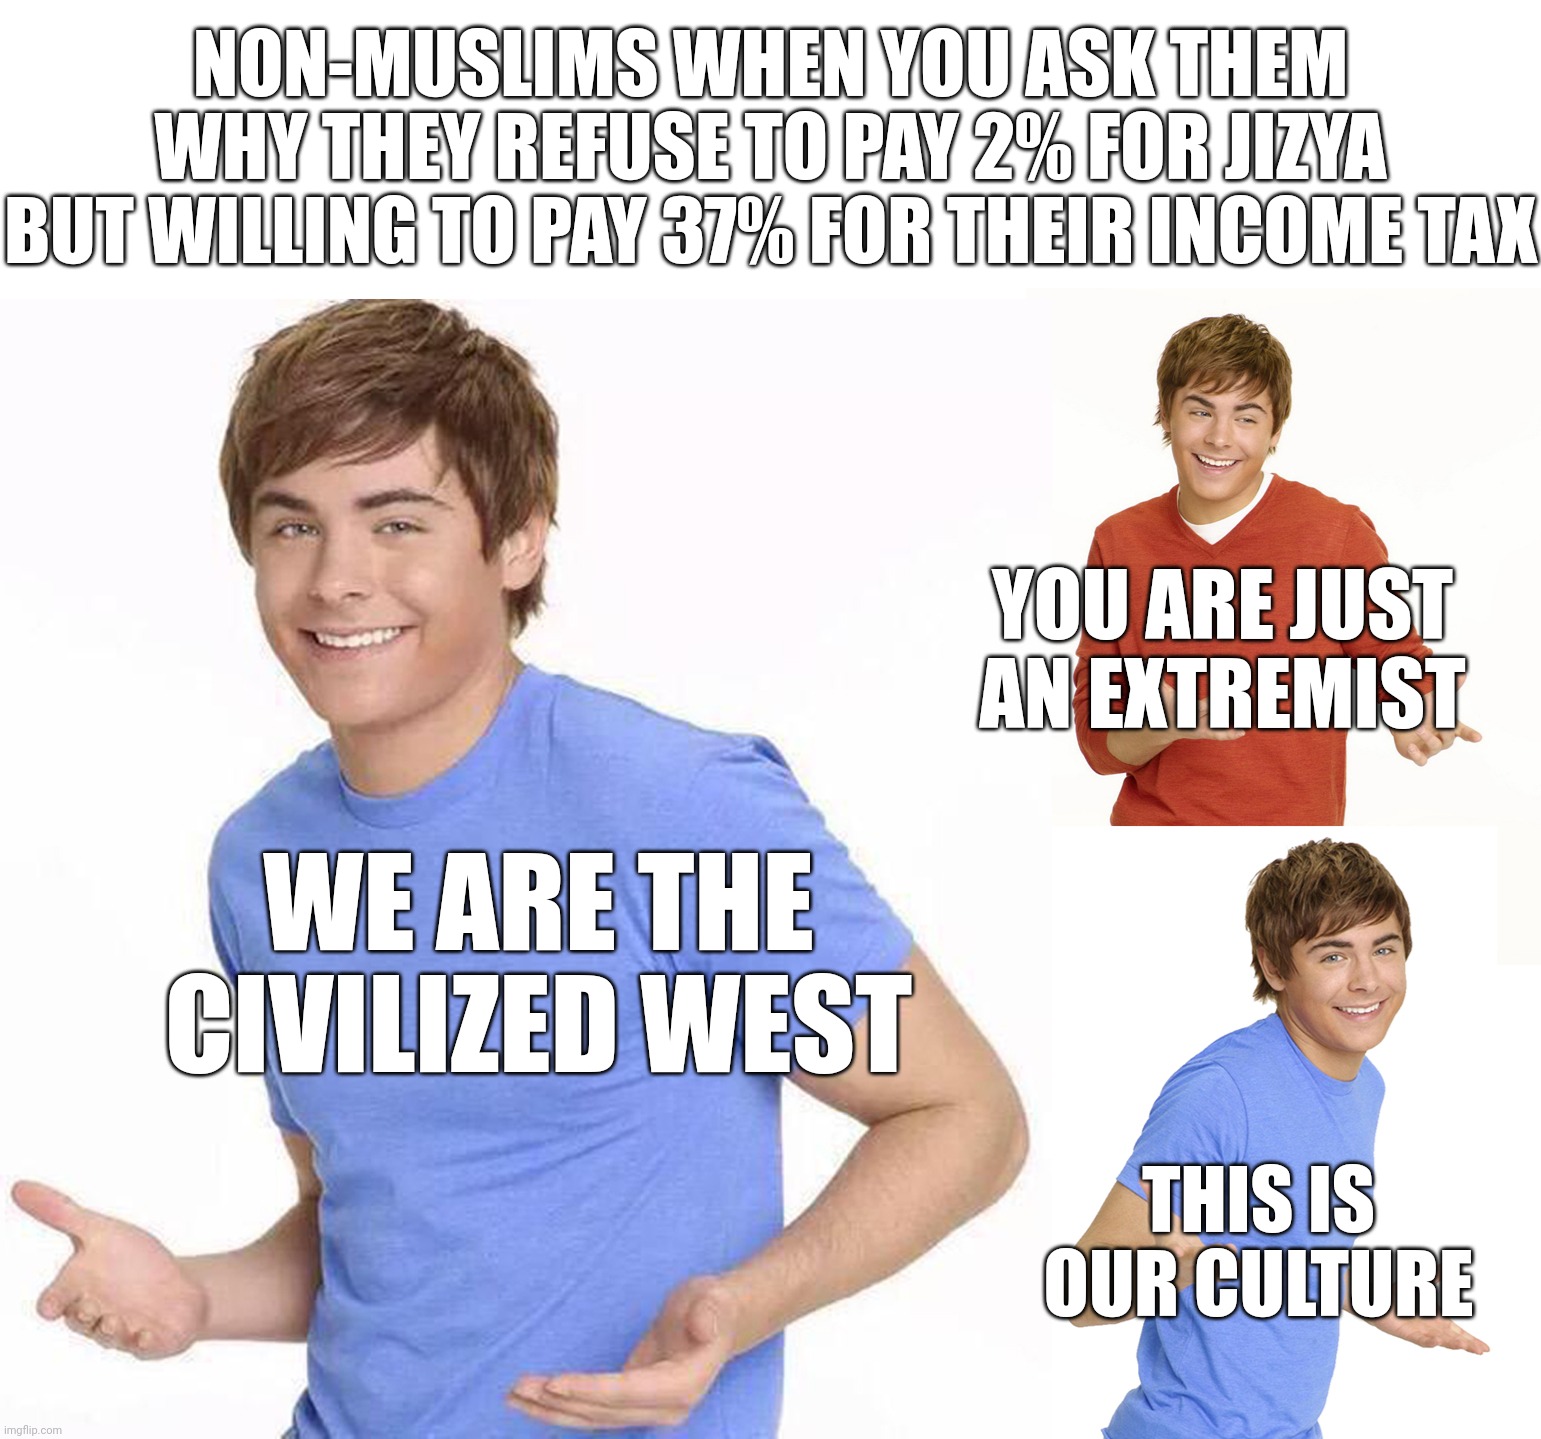 The "Civilized" West Strikes Again | NON-MUSLIMS WHEN YOU ASK THEM WHY THEY REFUSE TO PAY 2% FOR JIZYA BUT WILLING TO PAY 37% FOR THEIR INCOME TAX; YOU ARE JUST AN EXTREMIST; WE ARE THE CIVILIZED WEST; THIS IS OUR CULTURE | image tagged in zac efron,islamophobia,western,west,hypocrite,hypocrisy,PanIslamistPosting | made w/ Imgflip meme maker